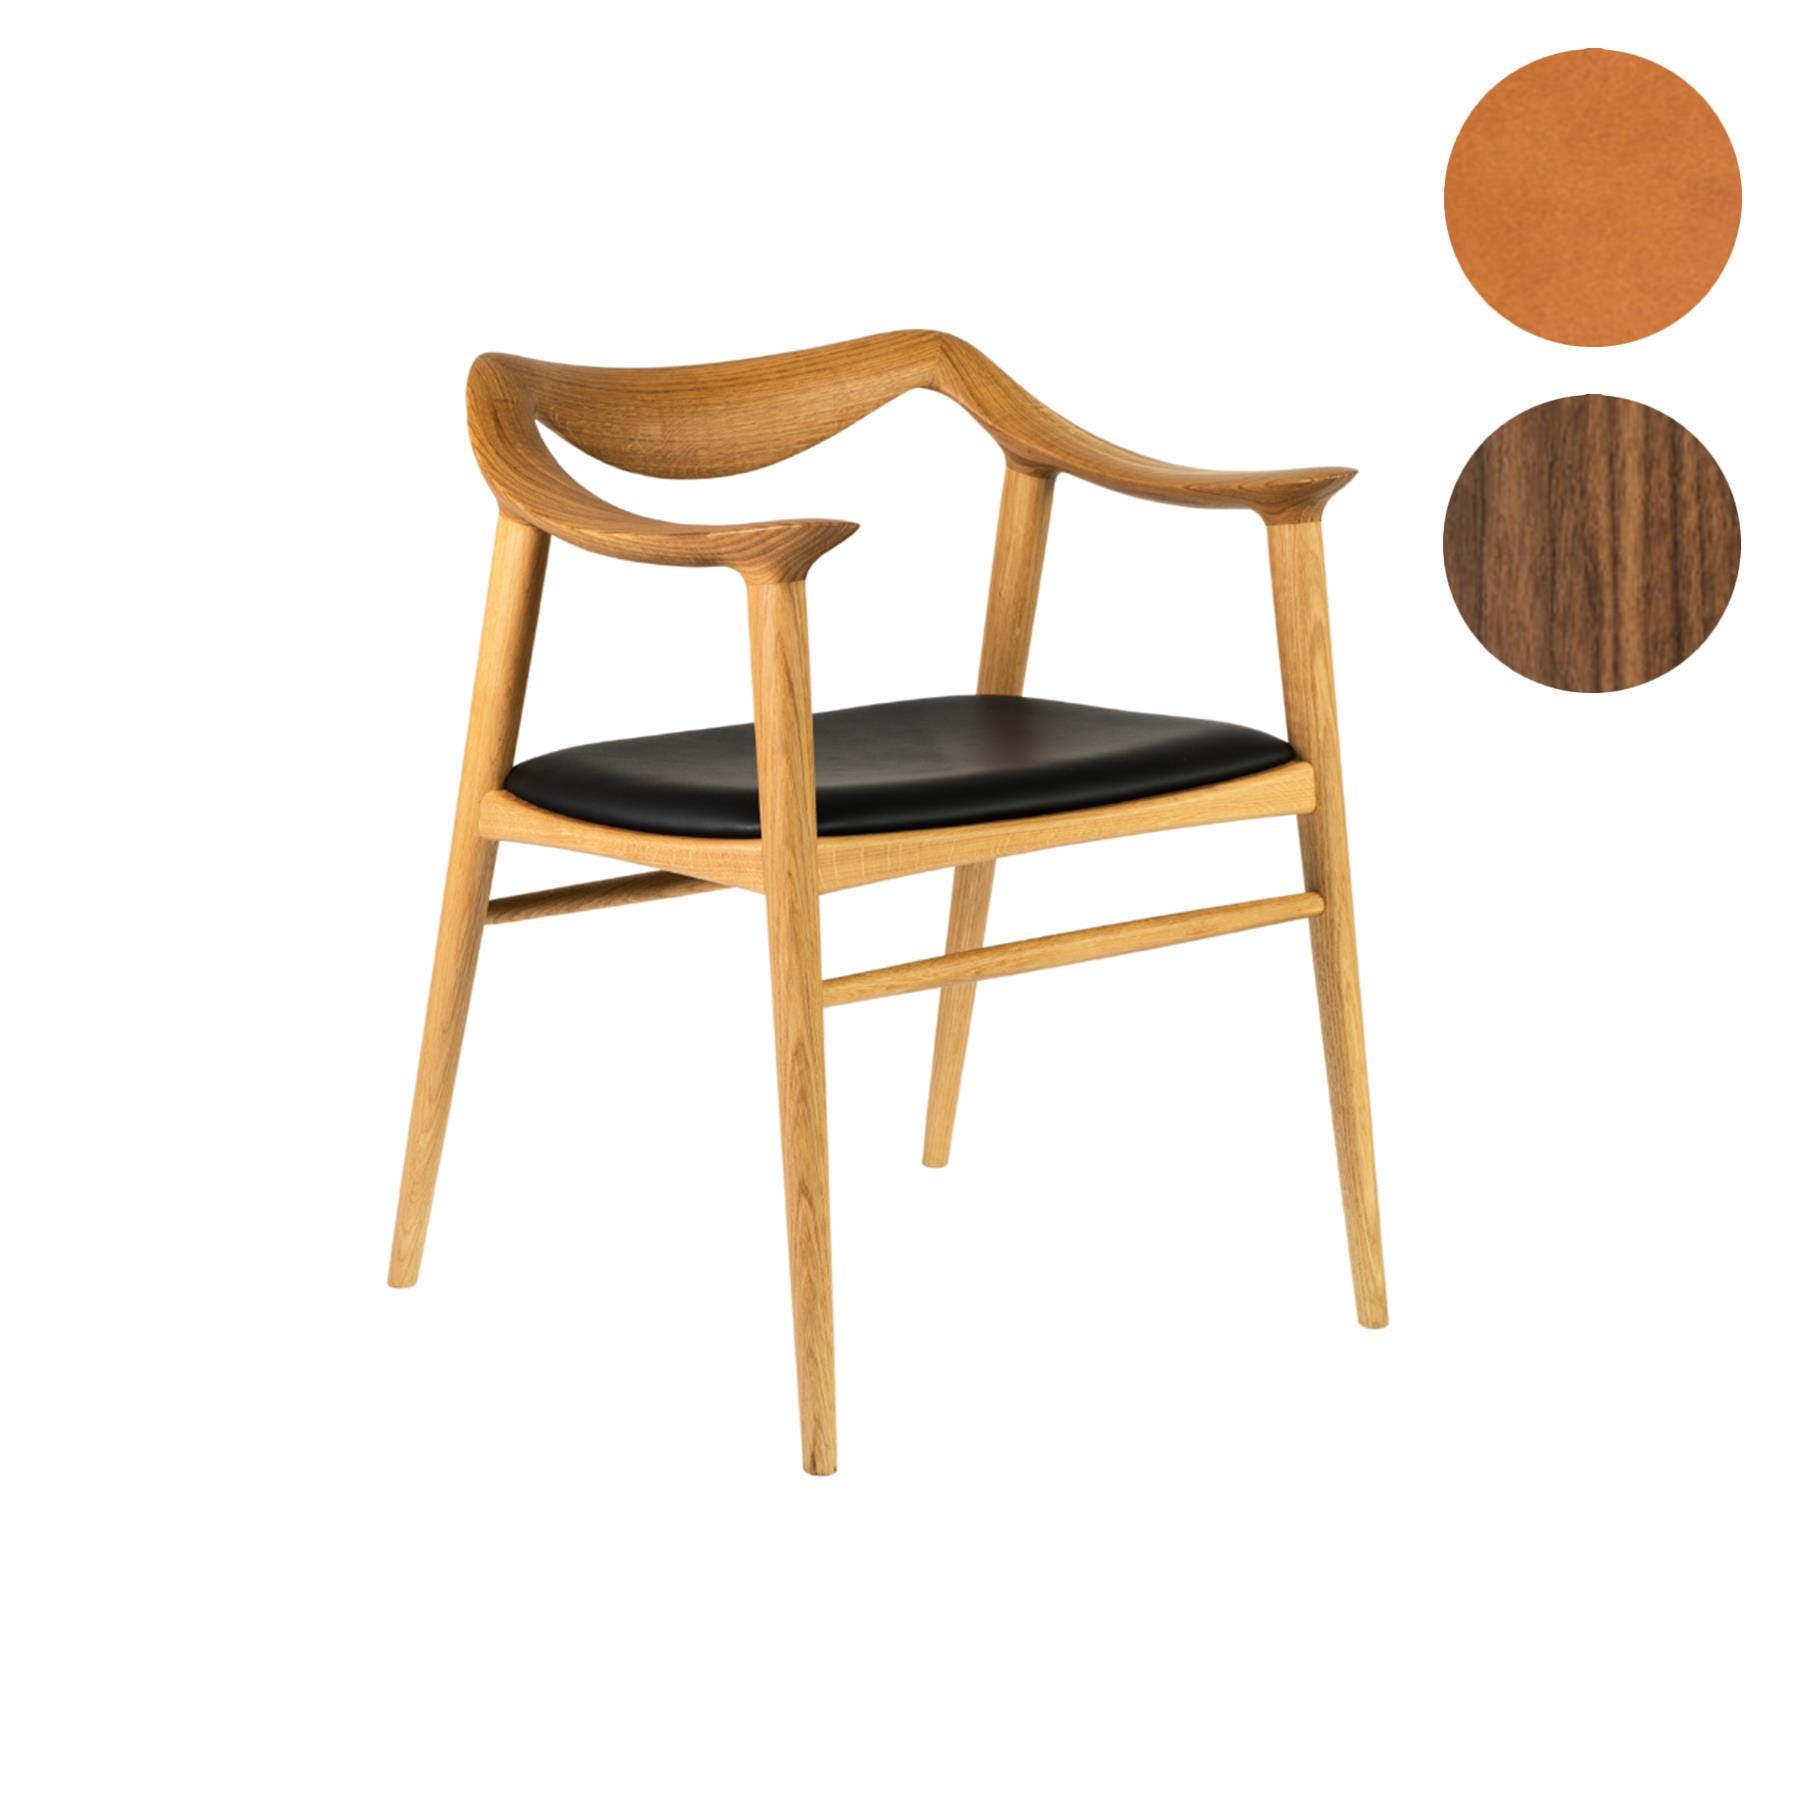 Fjordfiesta Bambi 573 Dining Chair Walnut Light Brown Leather Designer Furniture From Holloways Of Ludlow